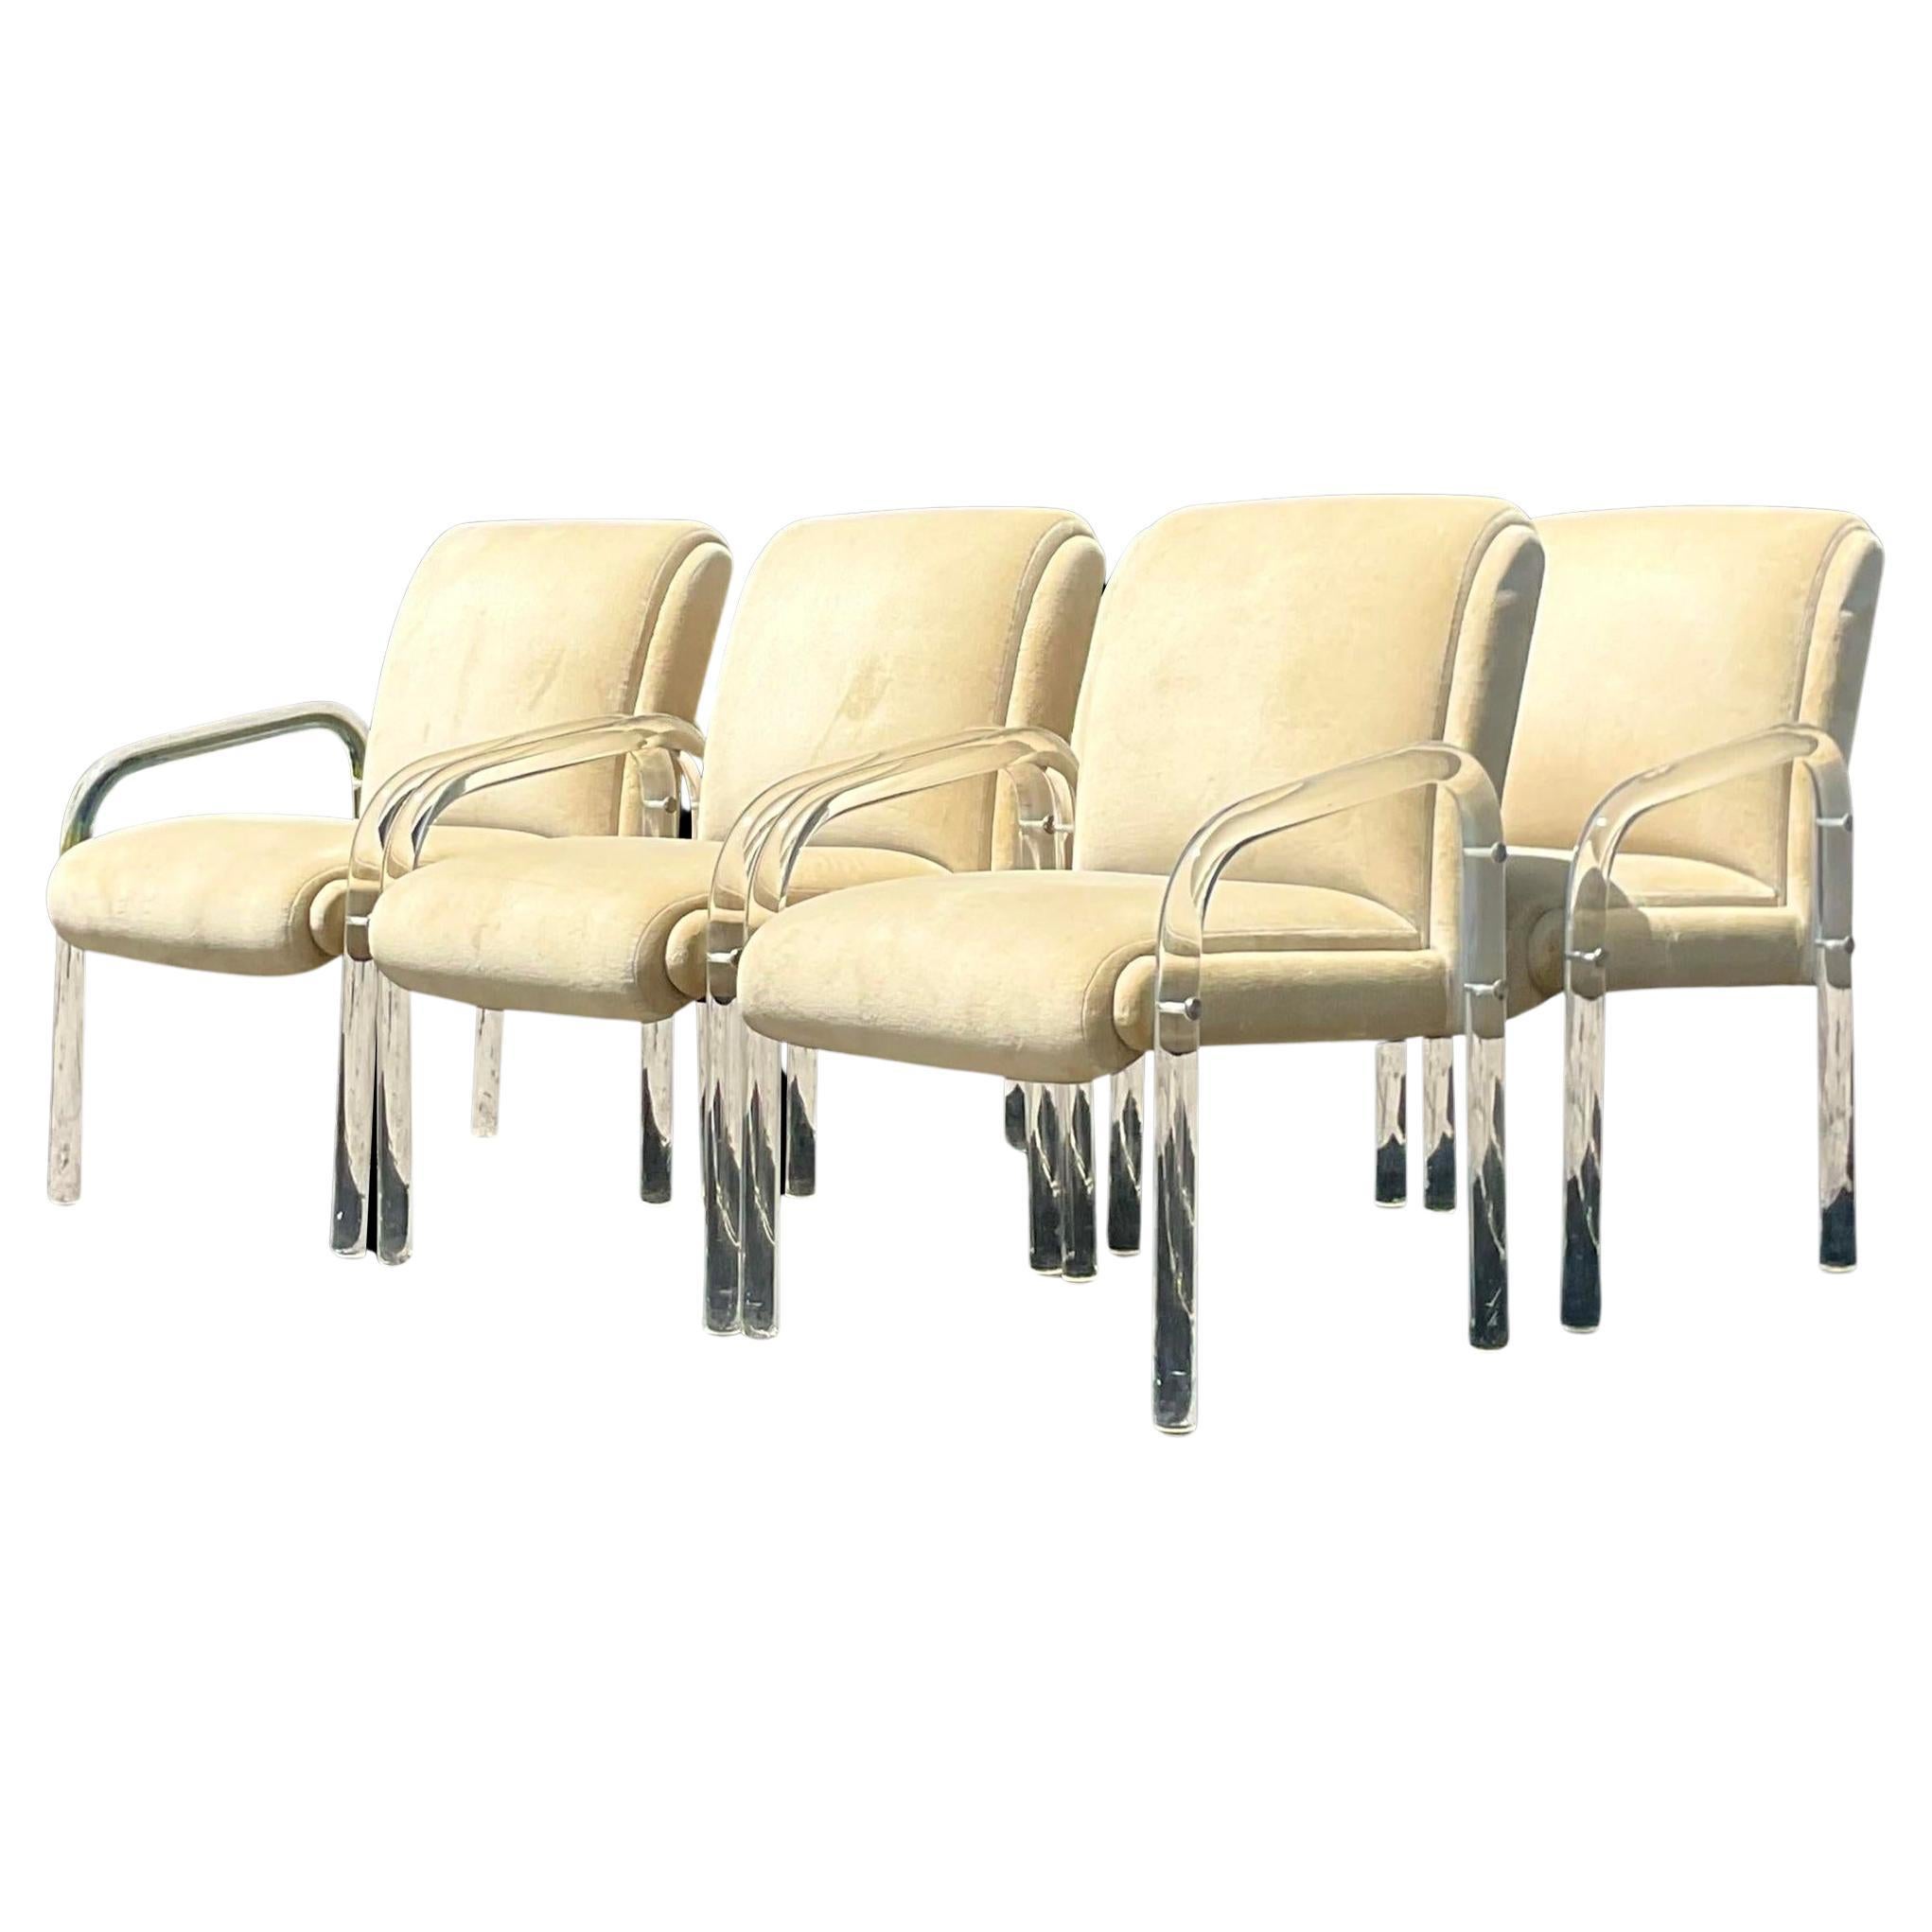 Vintage Contemporary Lucite Dining Chairs After Pace - Set of 6